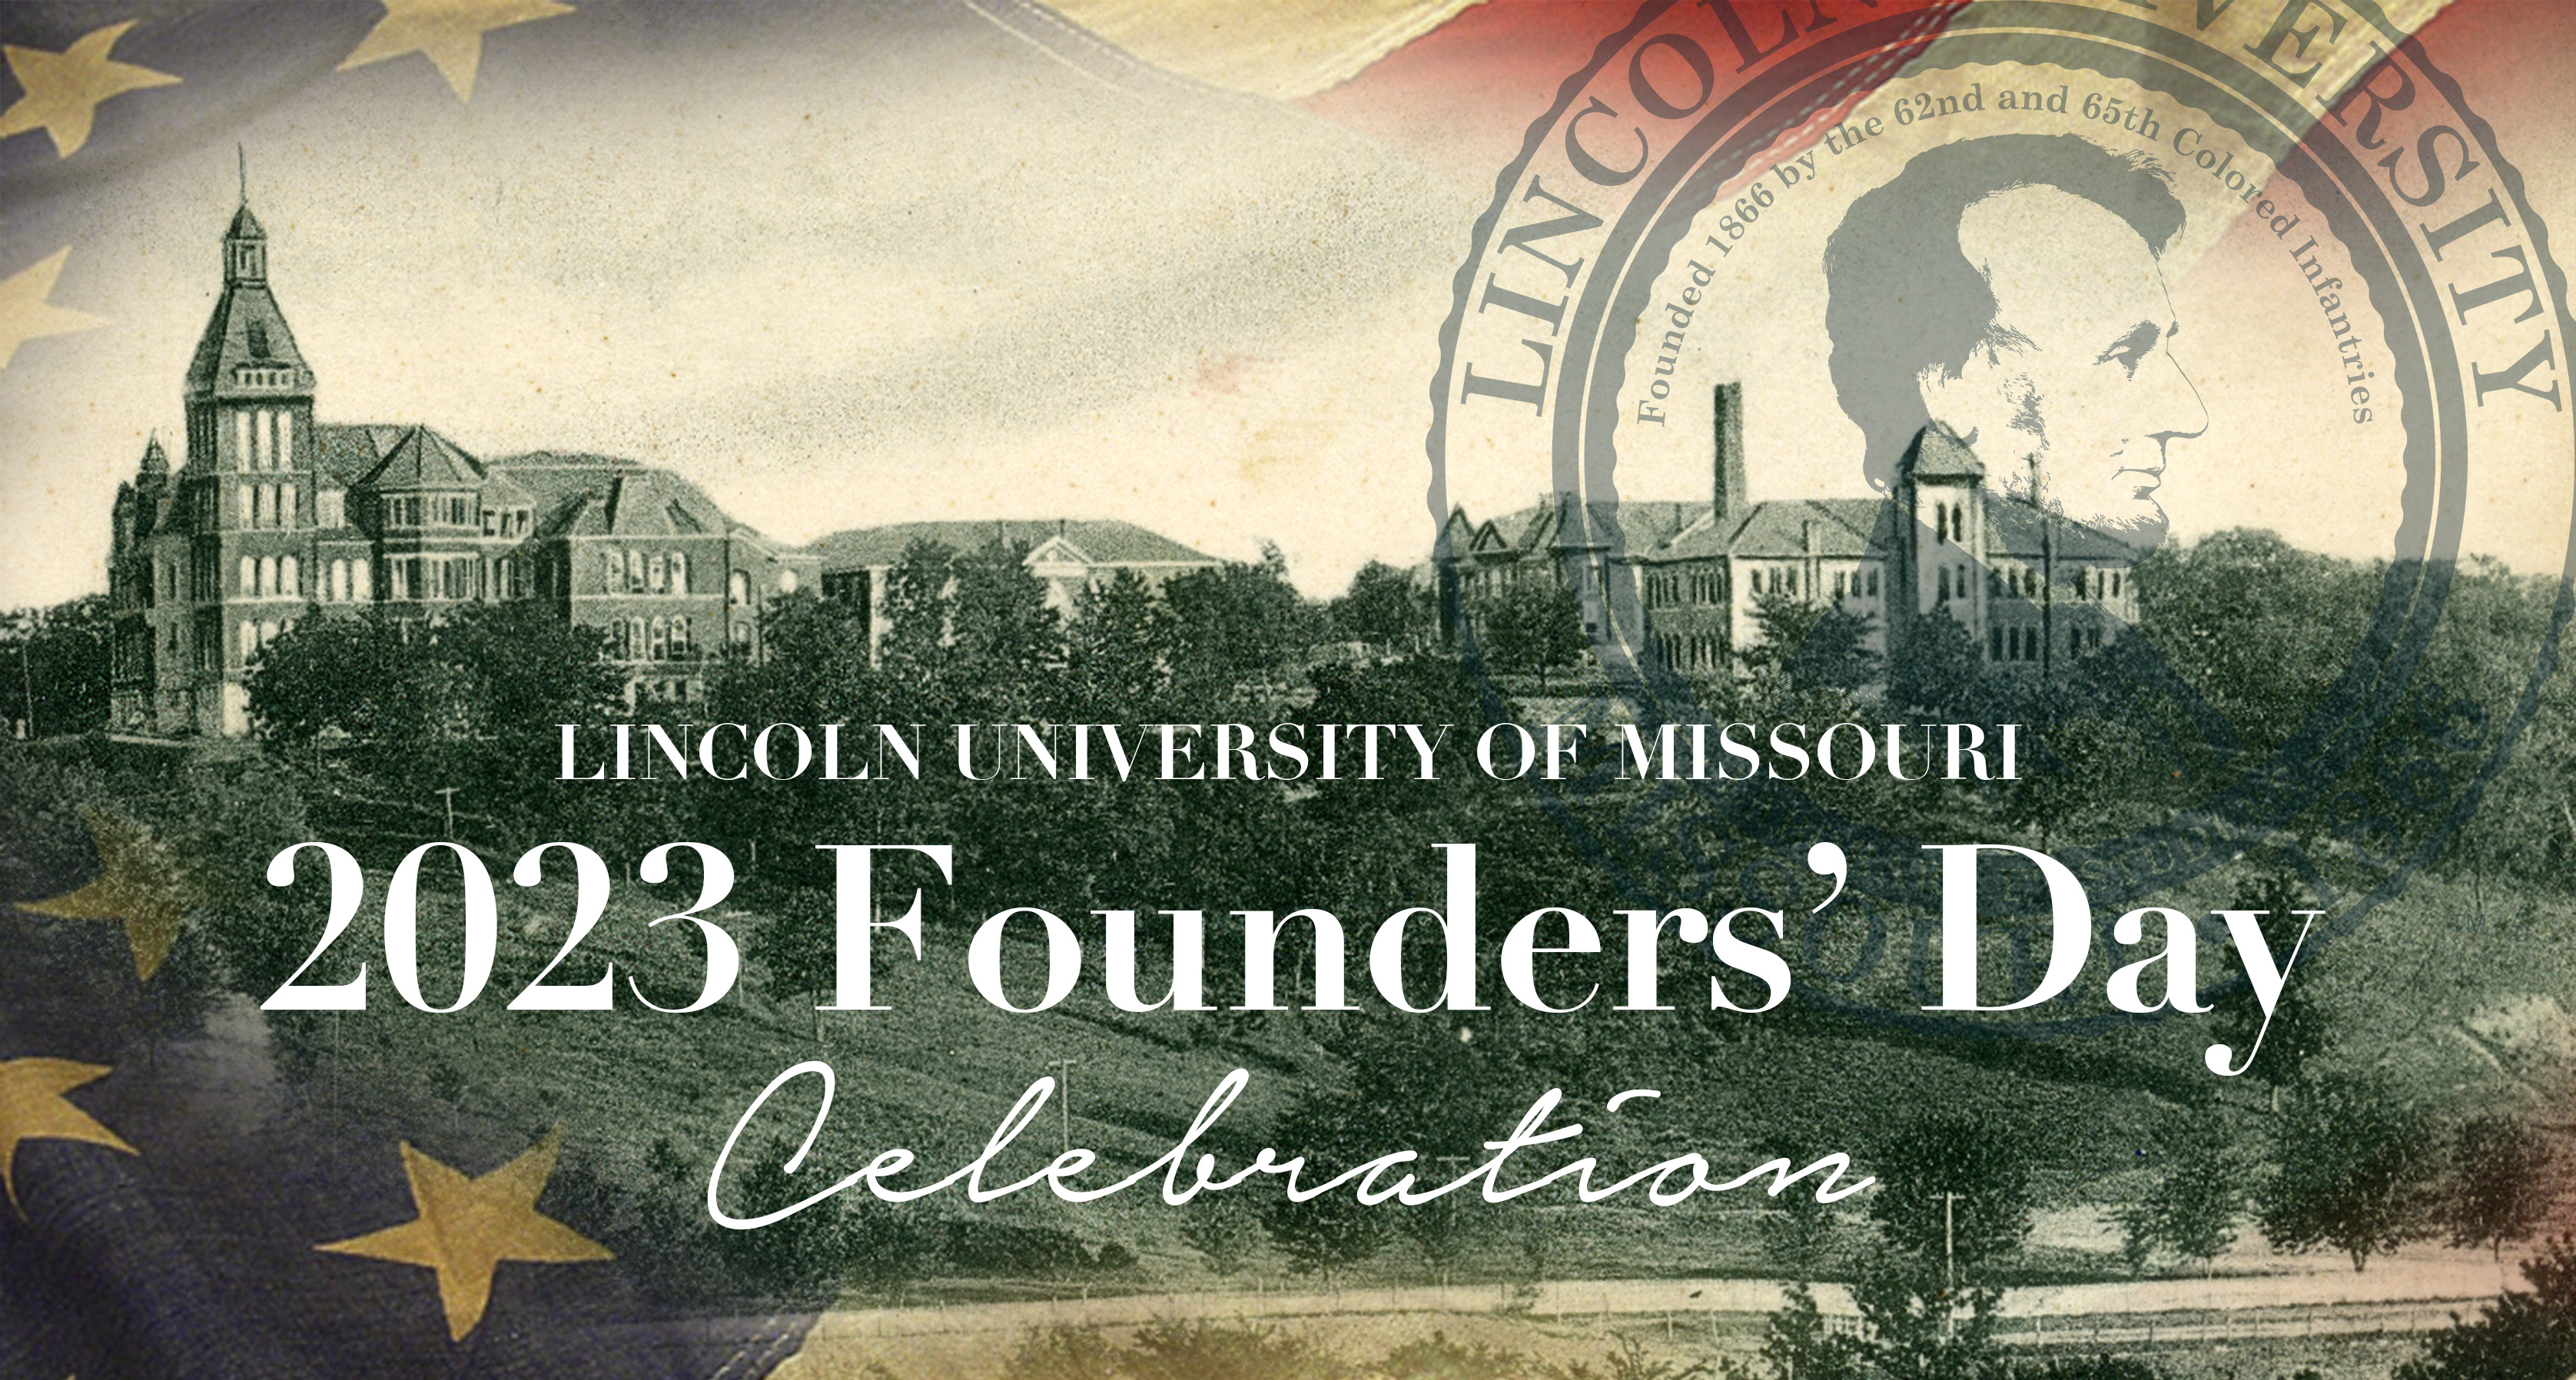 Founders’ Day celebrates Lincoln’s 157 years of education service.